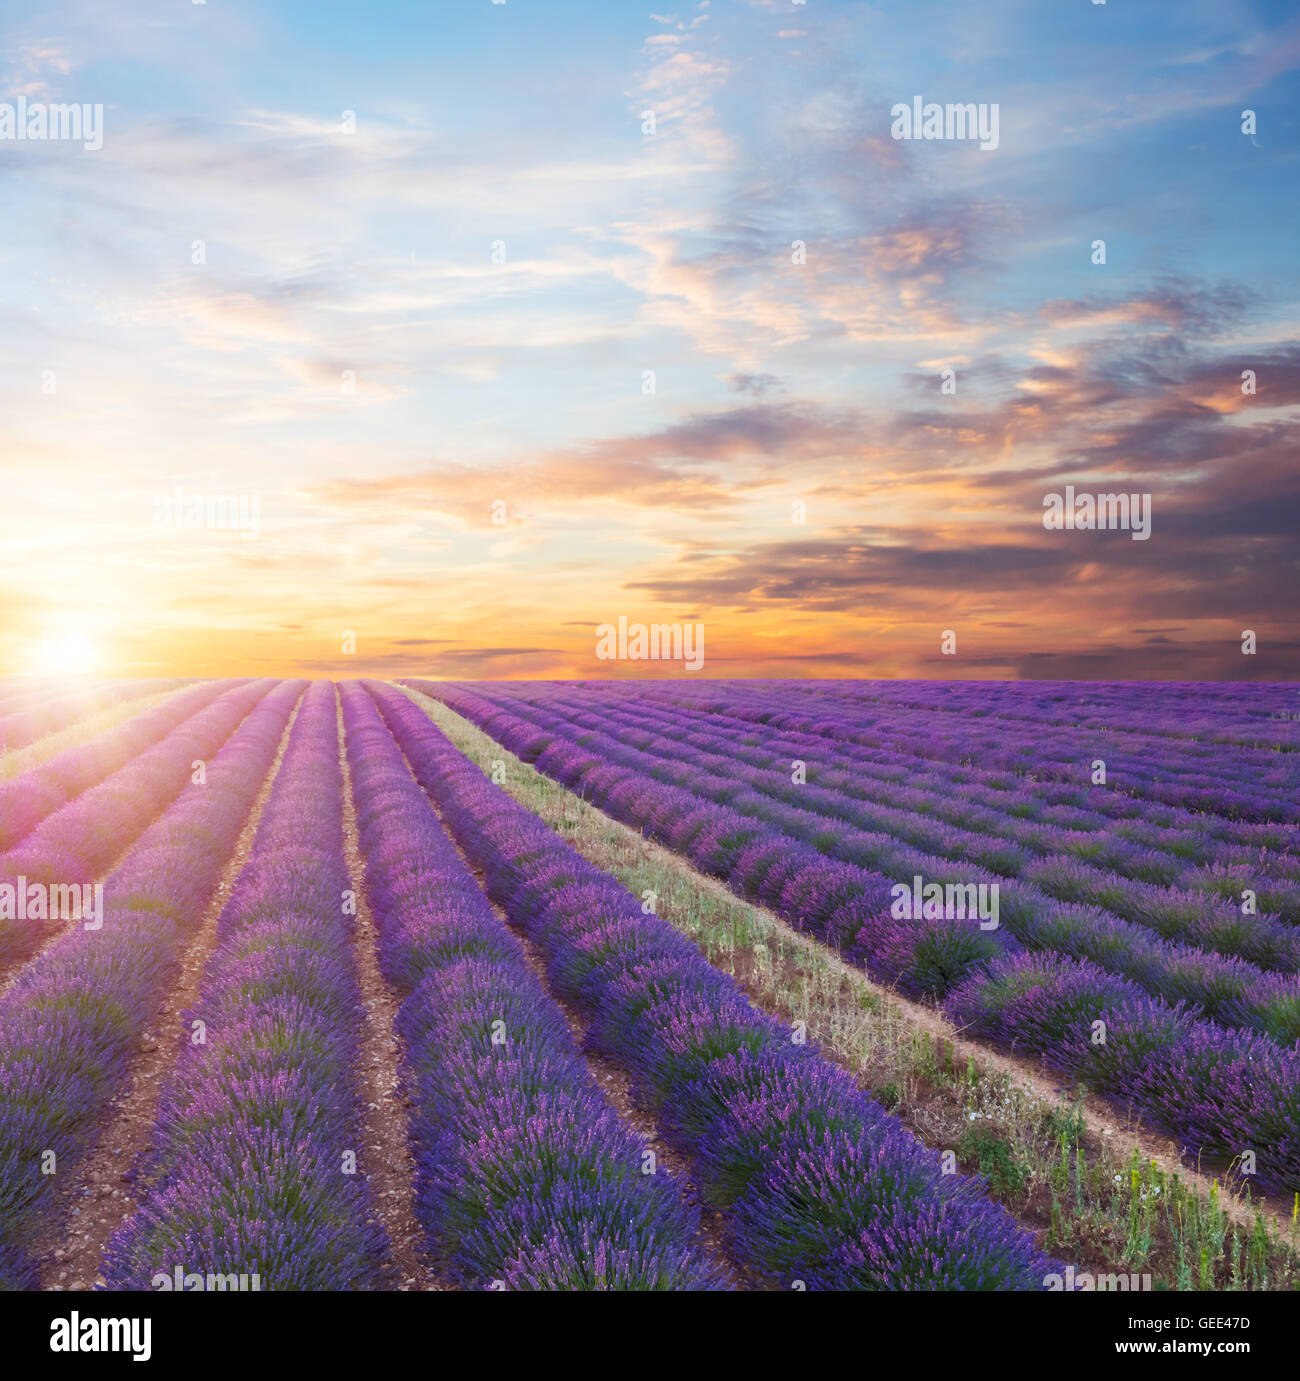 Beautiful landscape of blooming lavender field in sunset, lonely tree uphill on horizon. Provence, France, Europe. Stock Photo